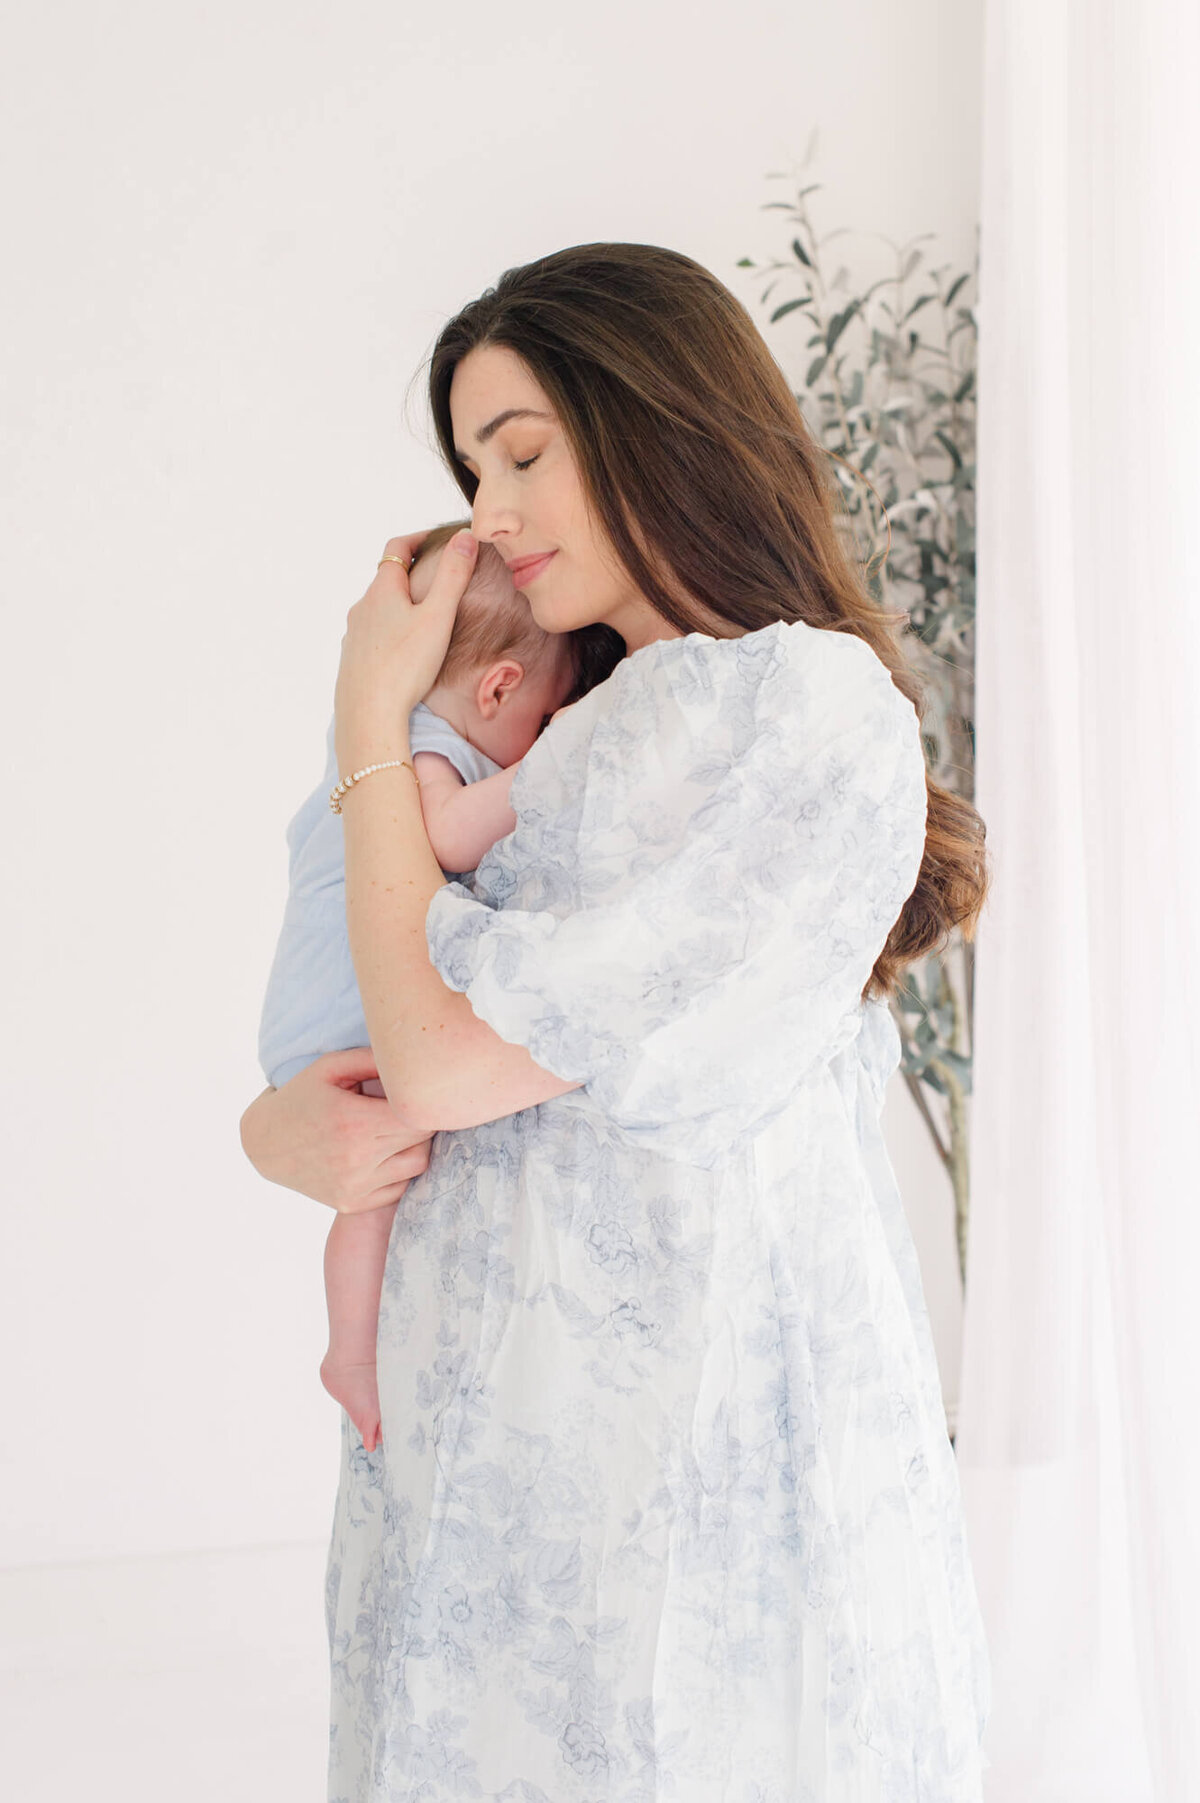 Orlando newborn photographer captures a beautiful natural light studio image of a mother holding her son in a calm embrace